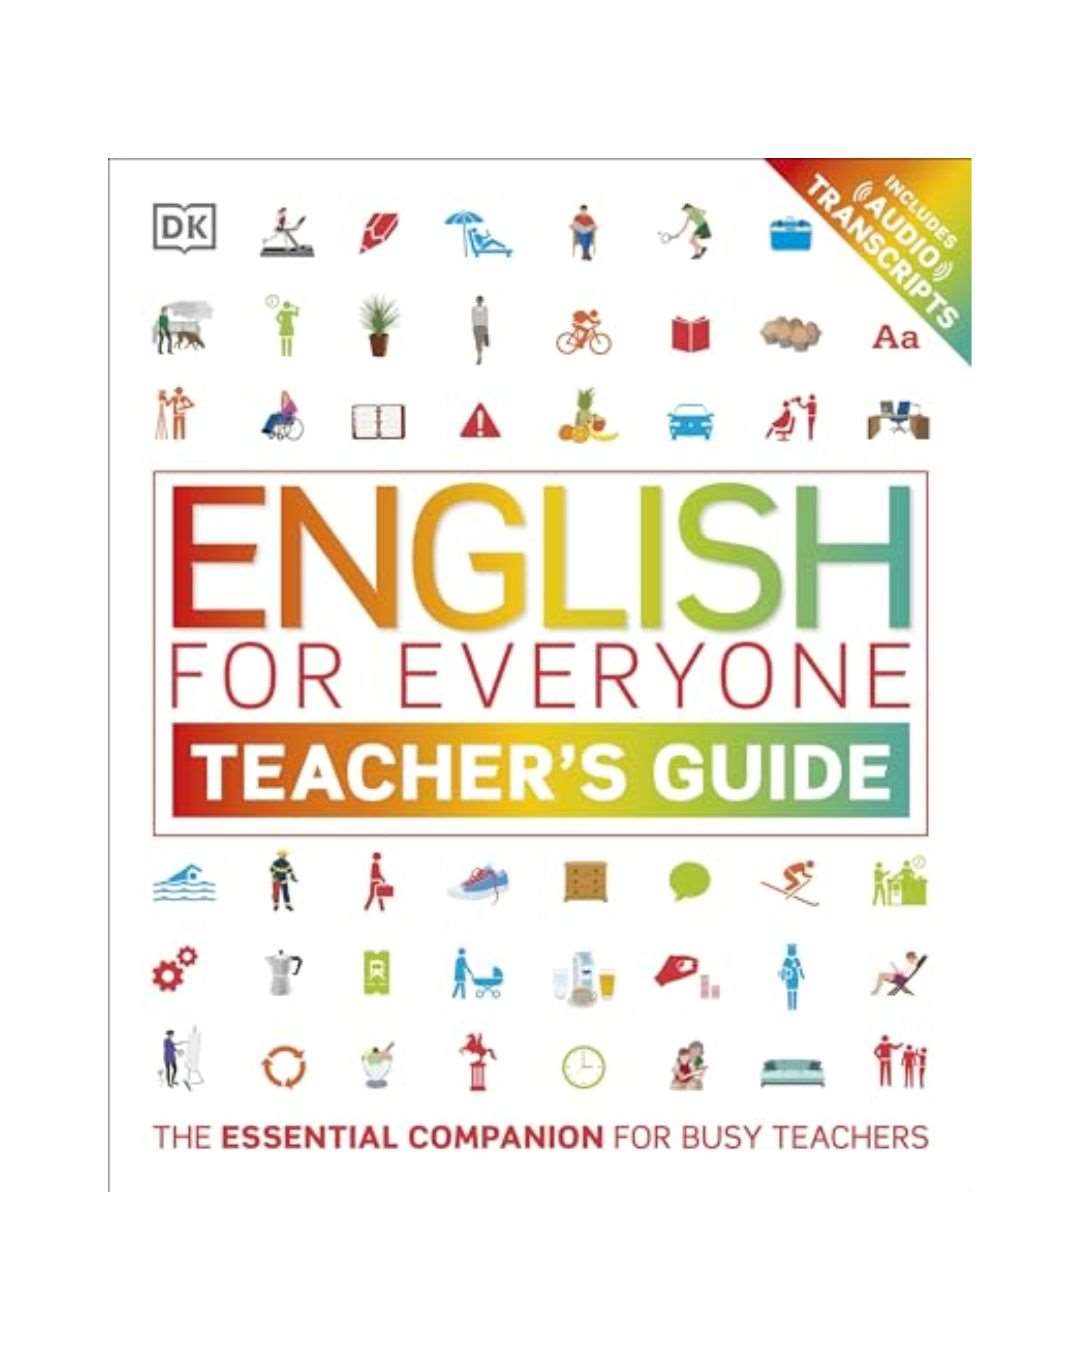 buy english for everyone teacher's guide online - OnlineBooksOutlet